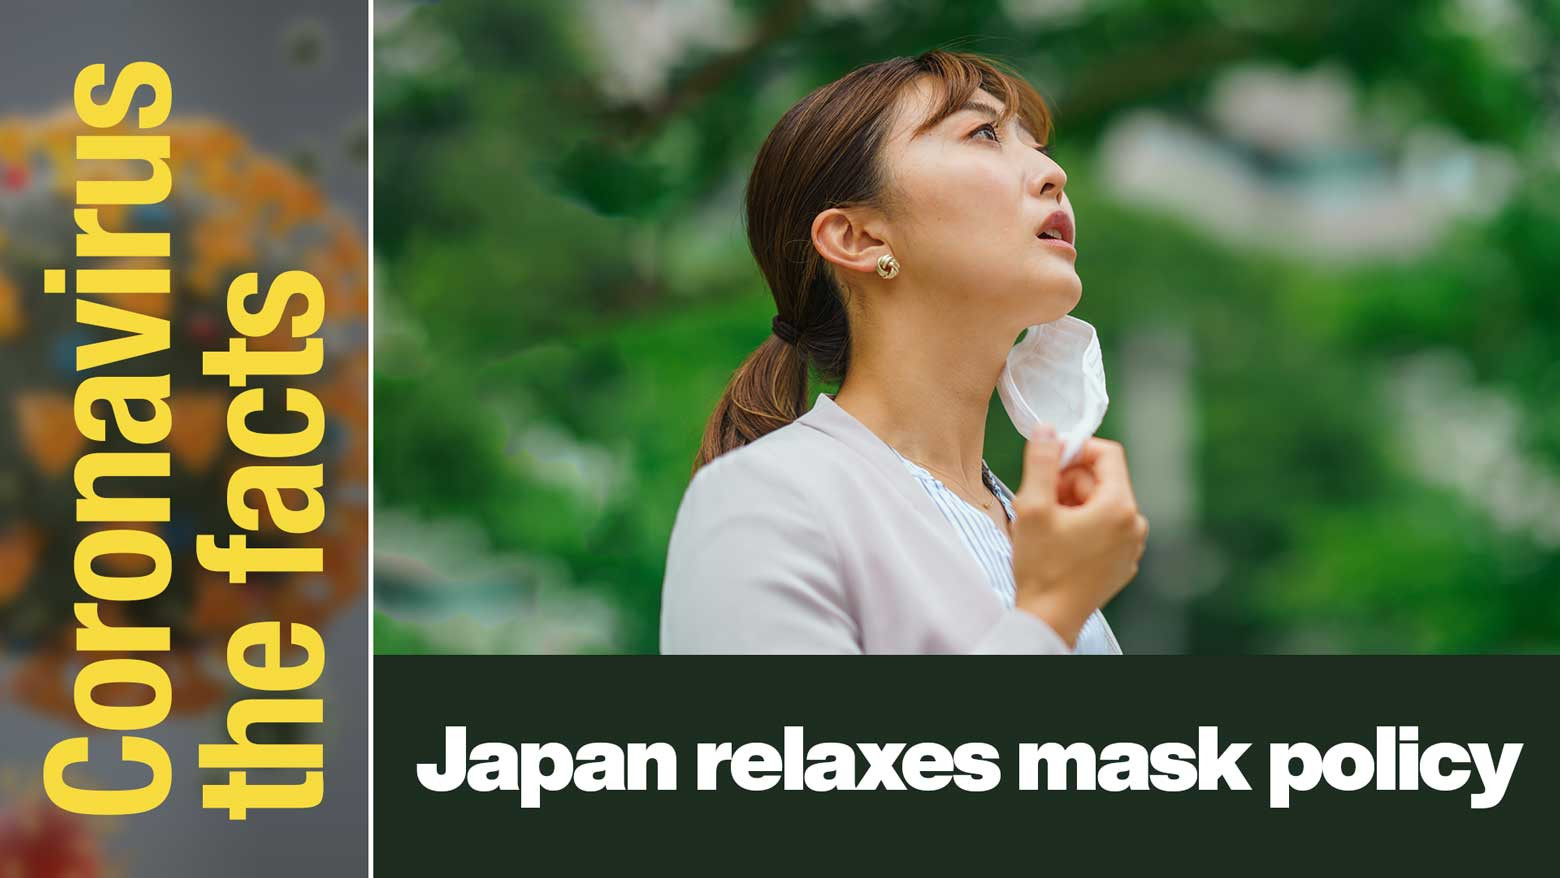 New guidelines for face masks in Japan